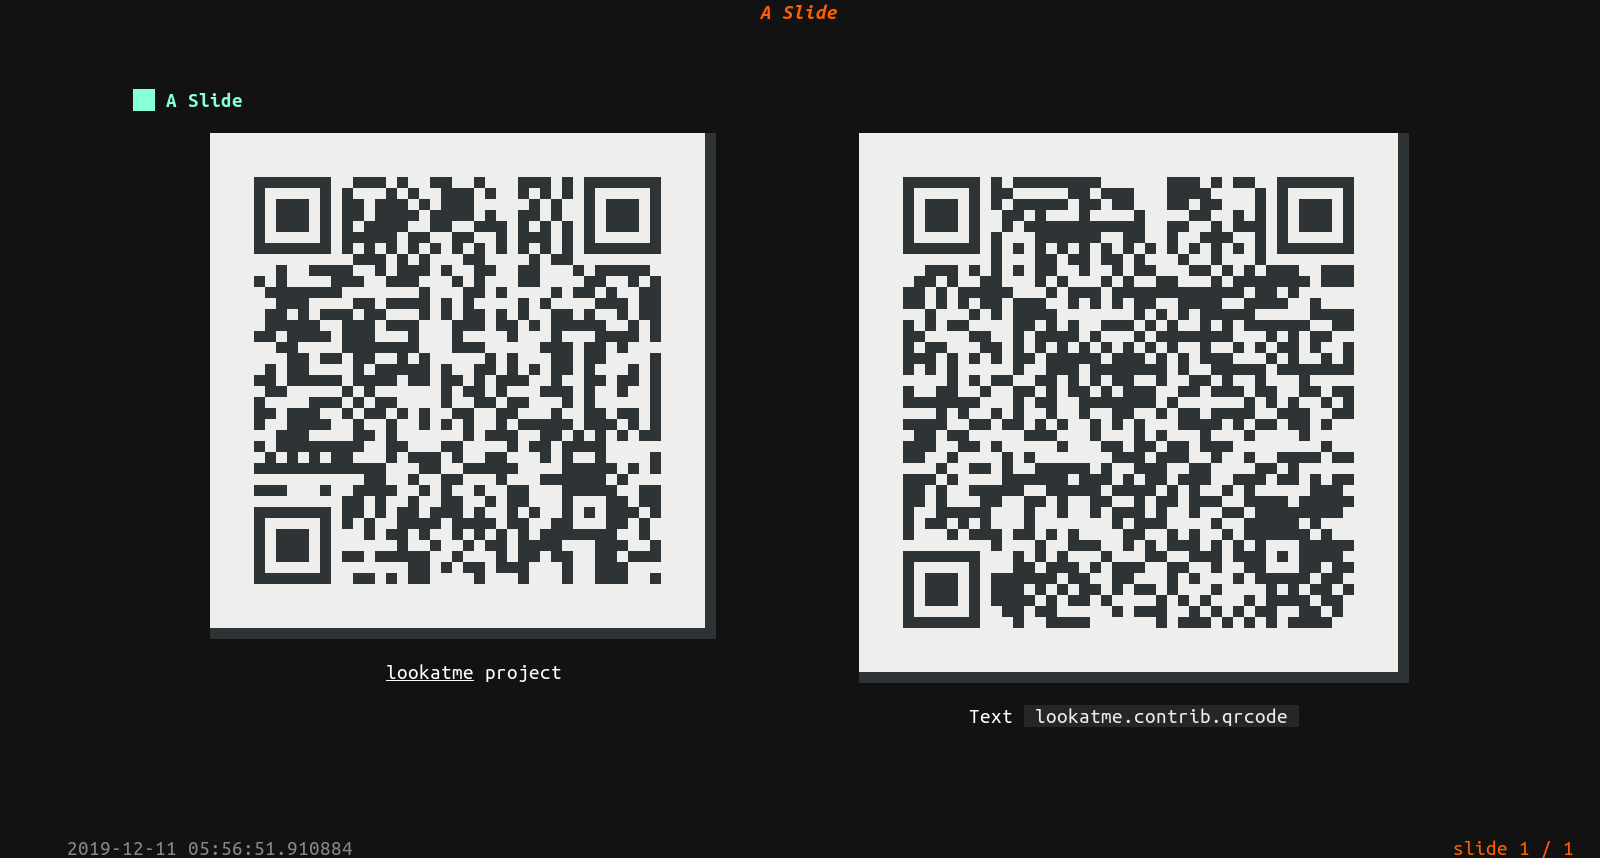 qrcode_double.png